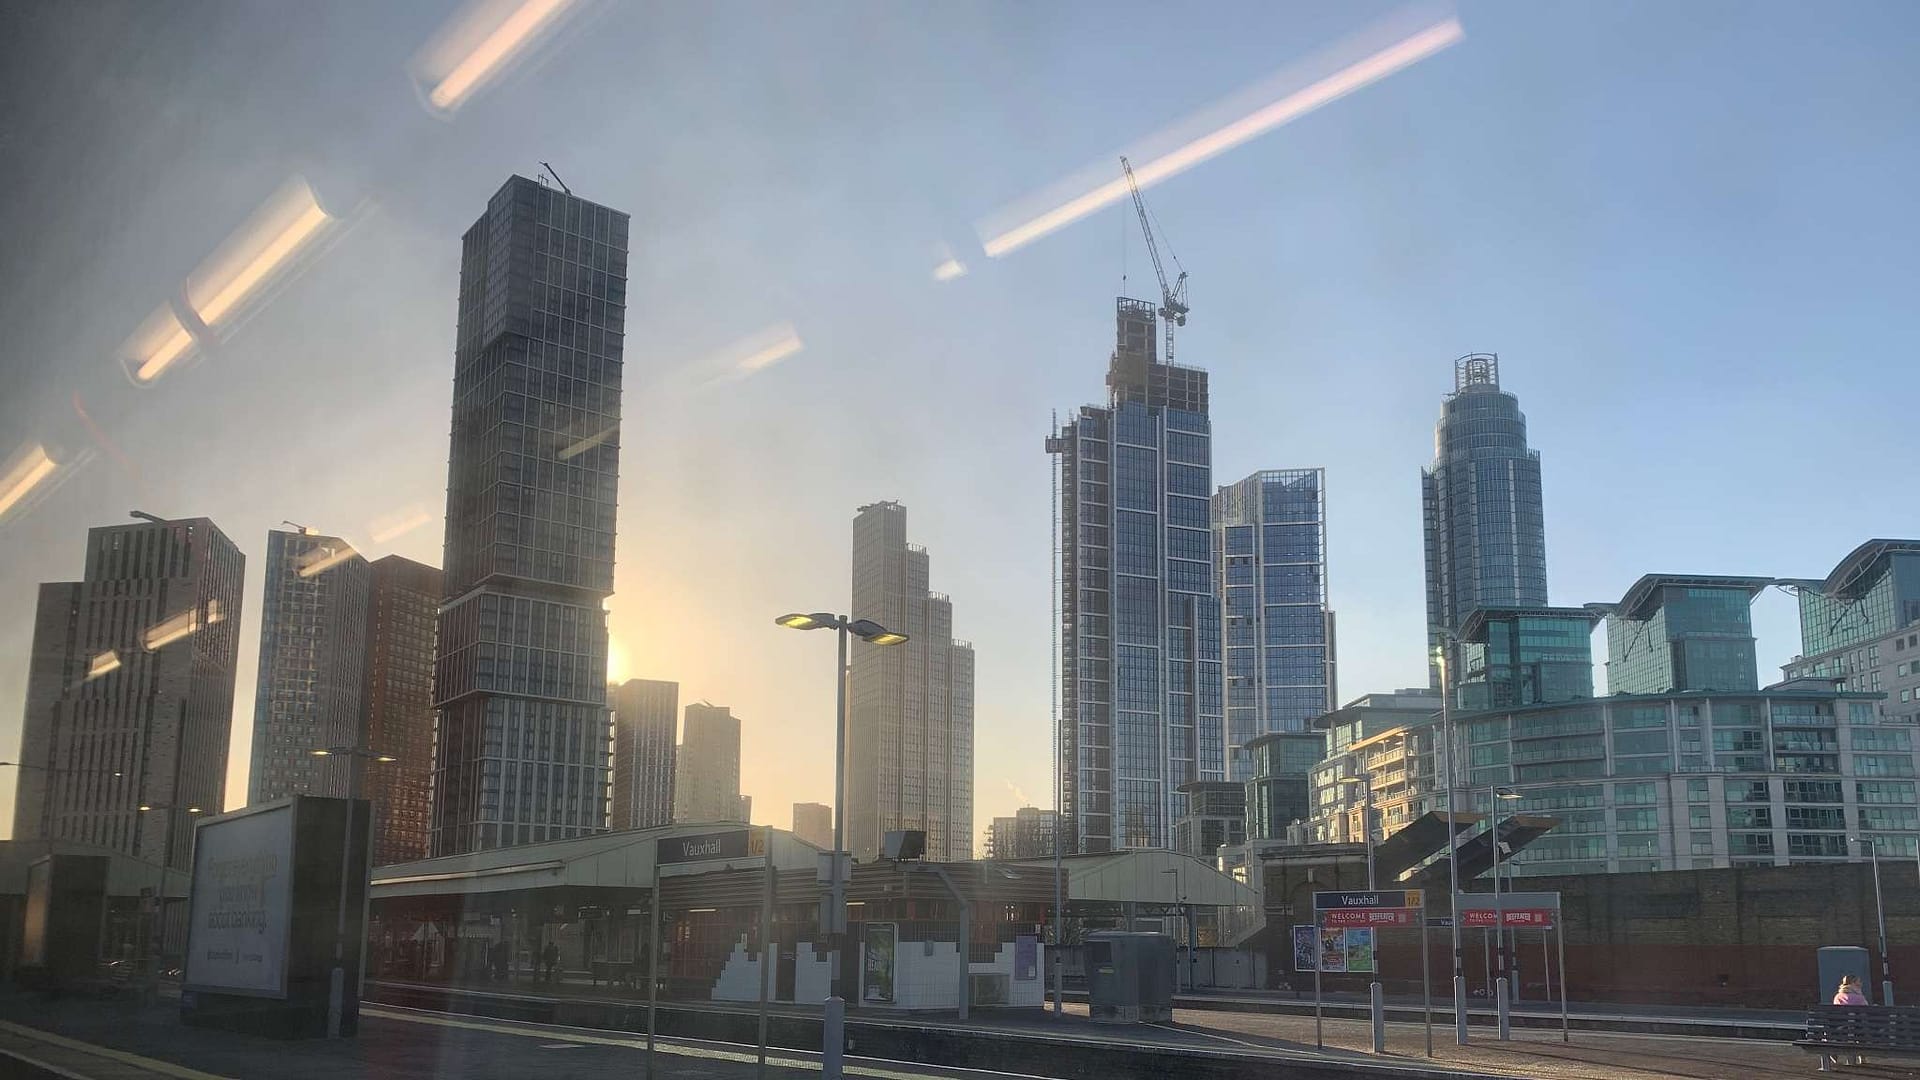 A view from Vauxhall station across the platforms from a train; the ugly high-rise kleptocrat buildings for them to wash their stolen money dominate the skyline. Burn it down, burn it all down.